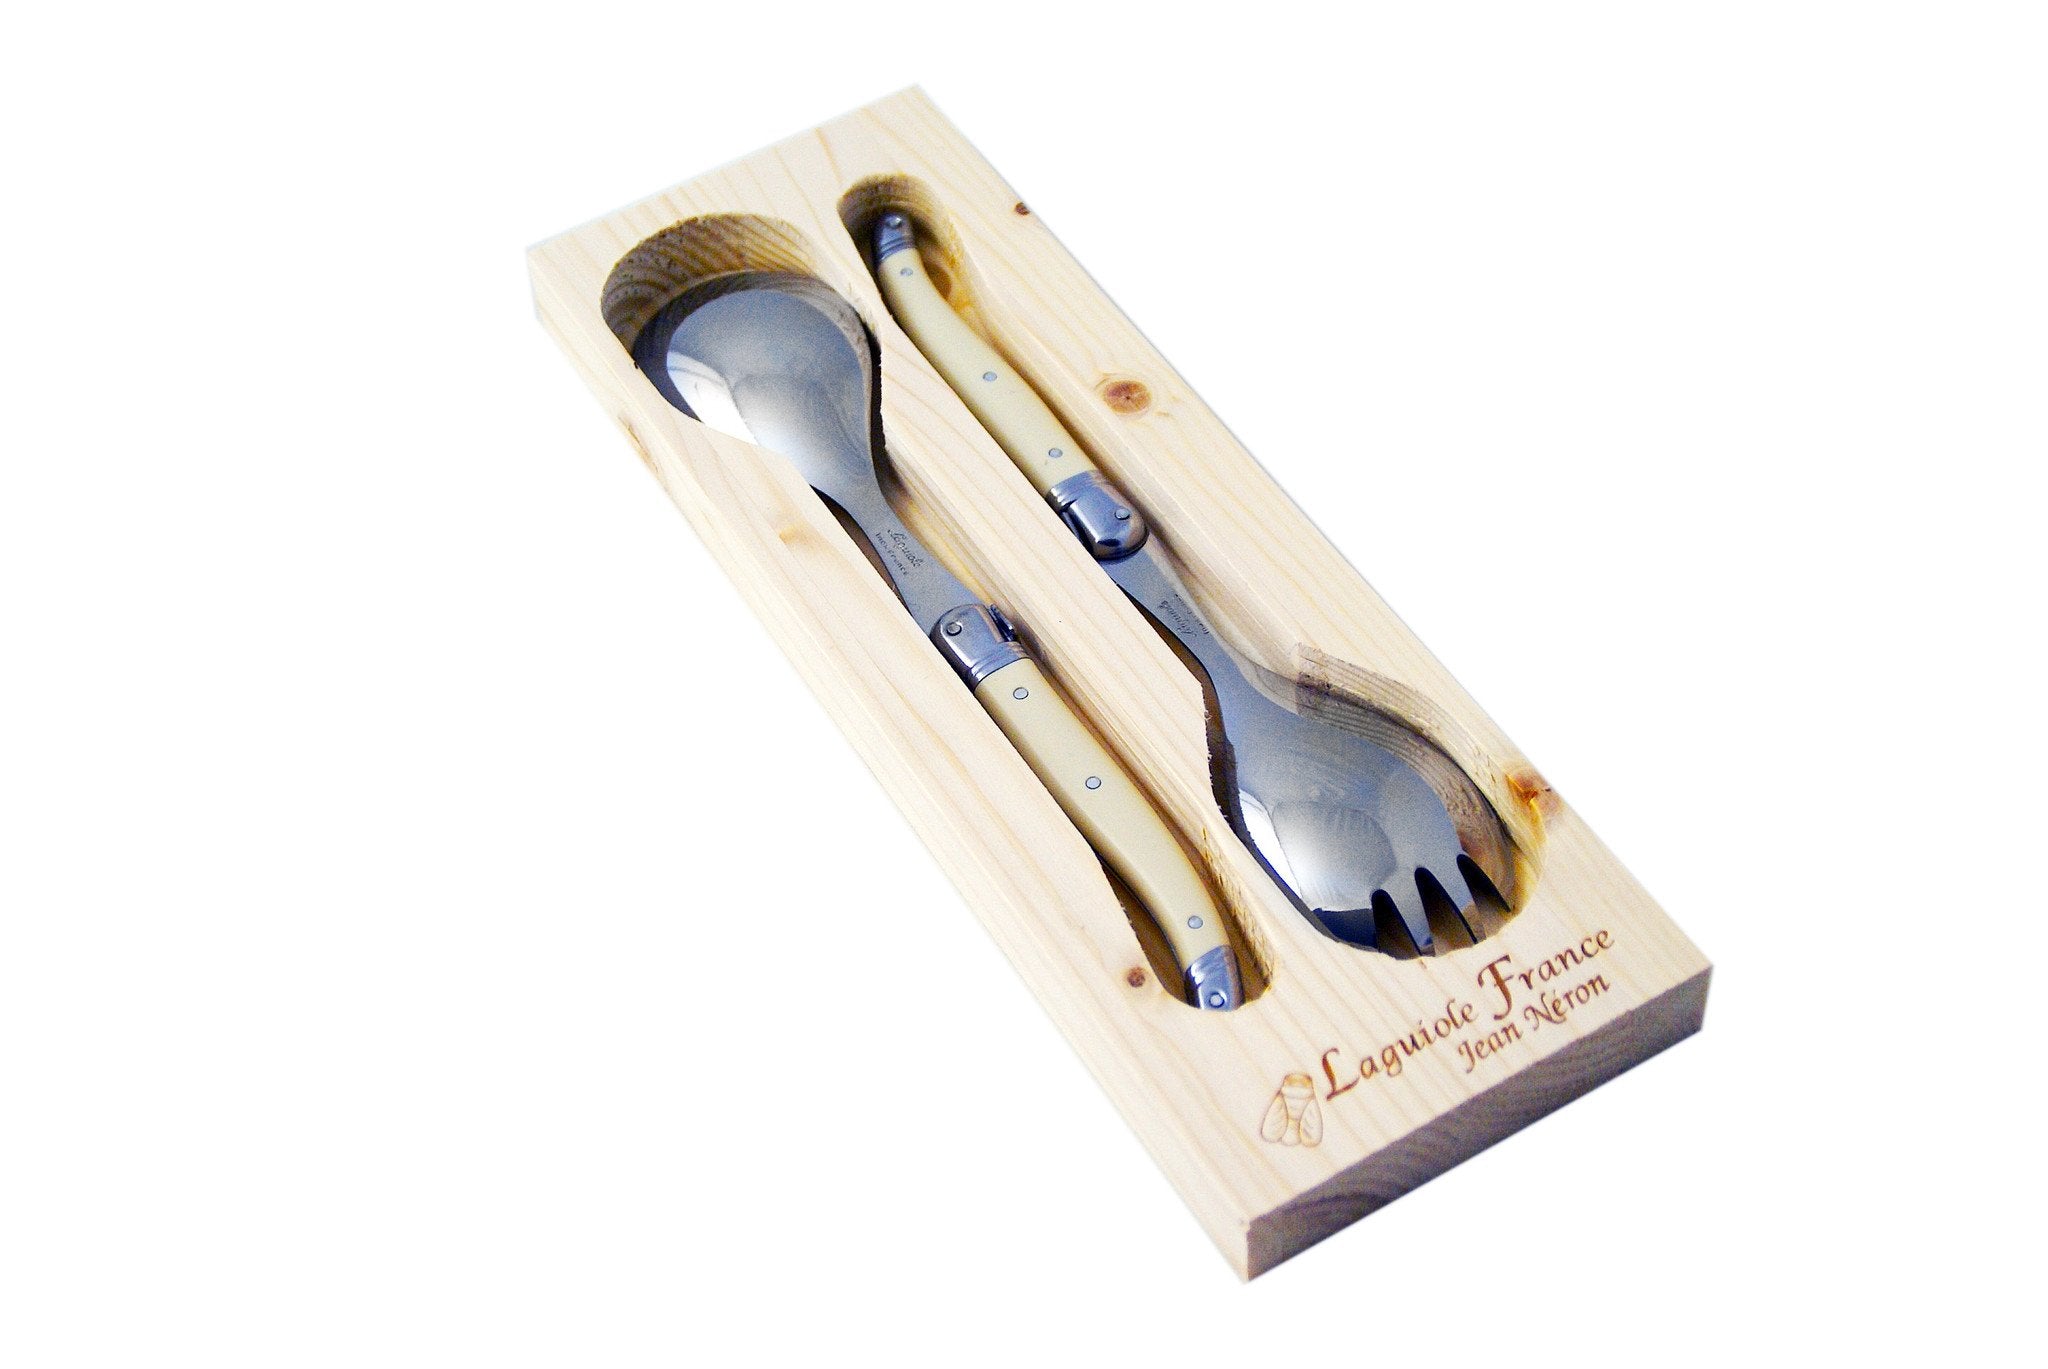 Laguiole French Ivory Salad Serving Set in Wood Box - French Dry Goods